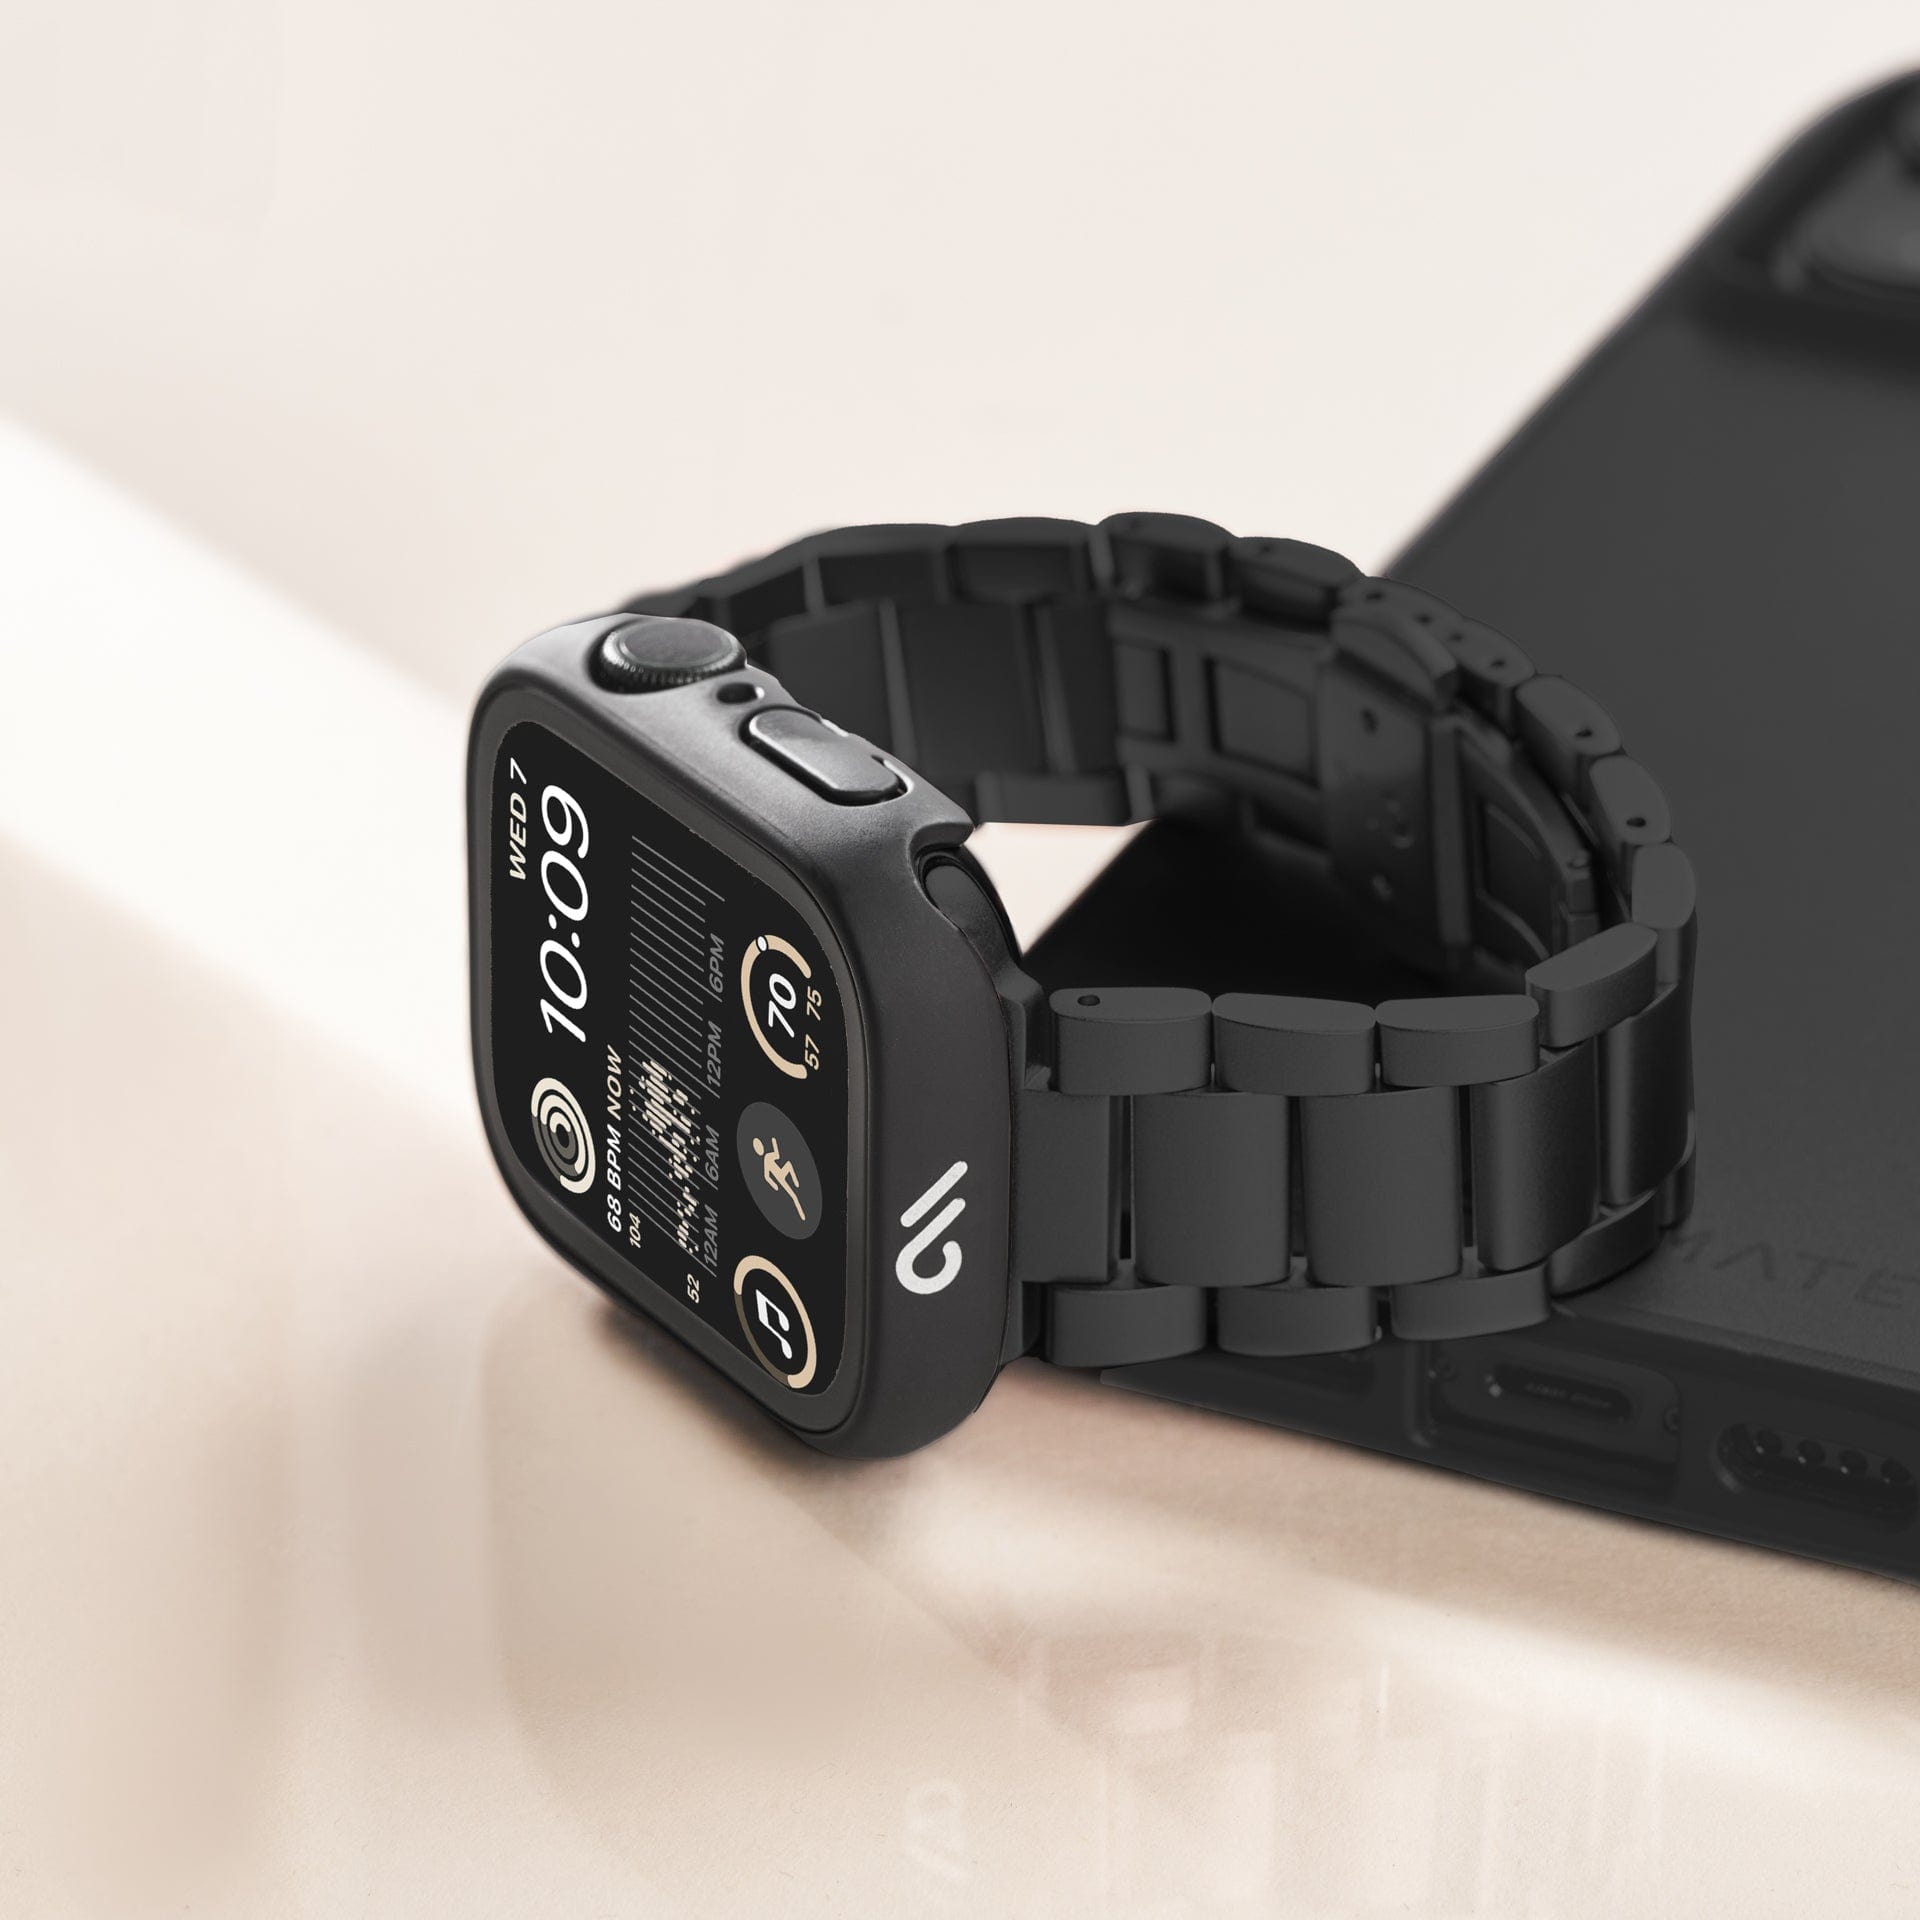 Black Tough Apple Watch Case on i's side with Case-Mate logo. 